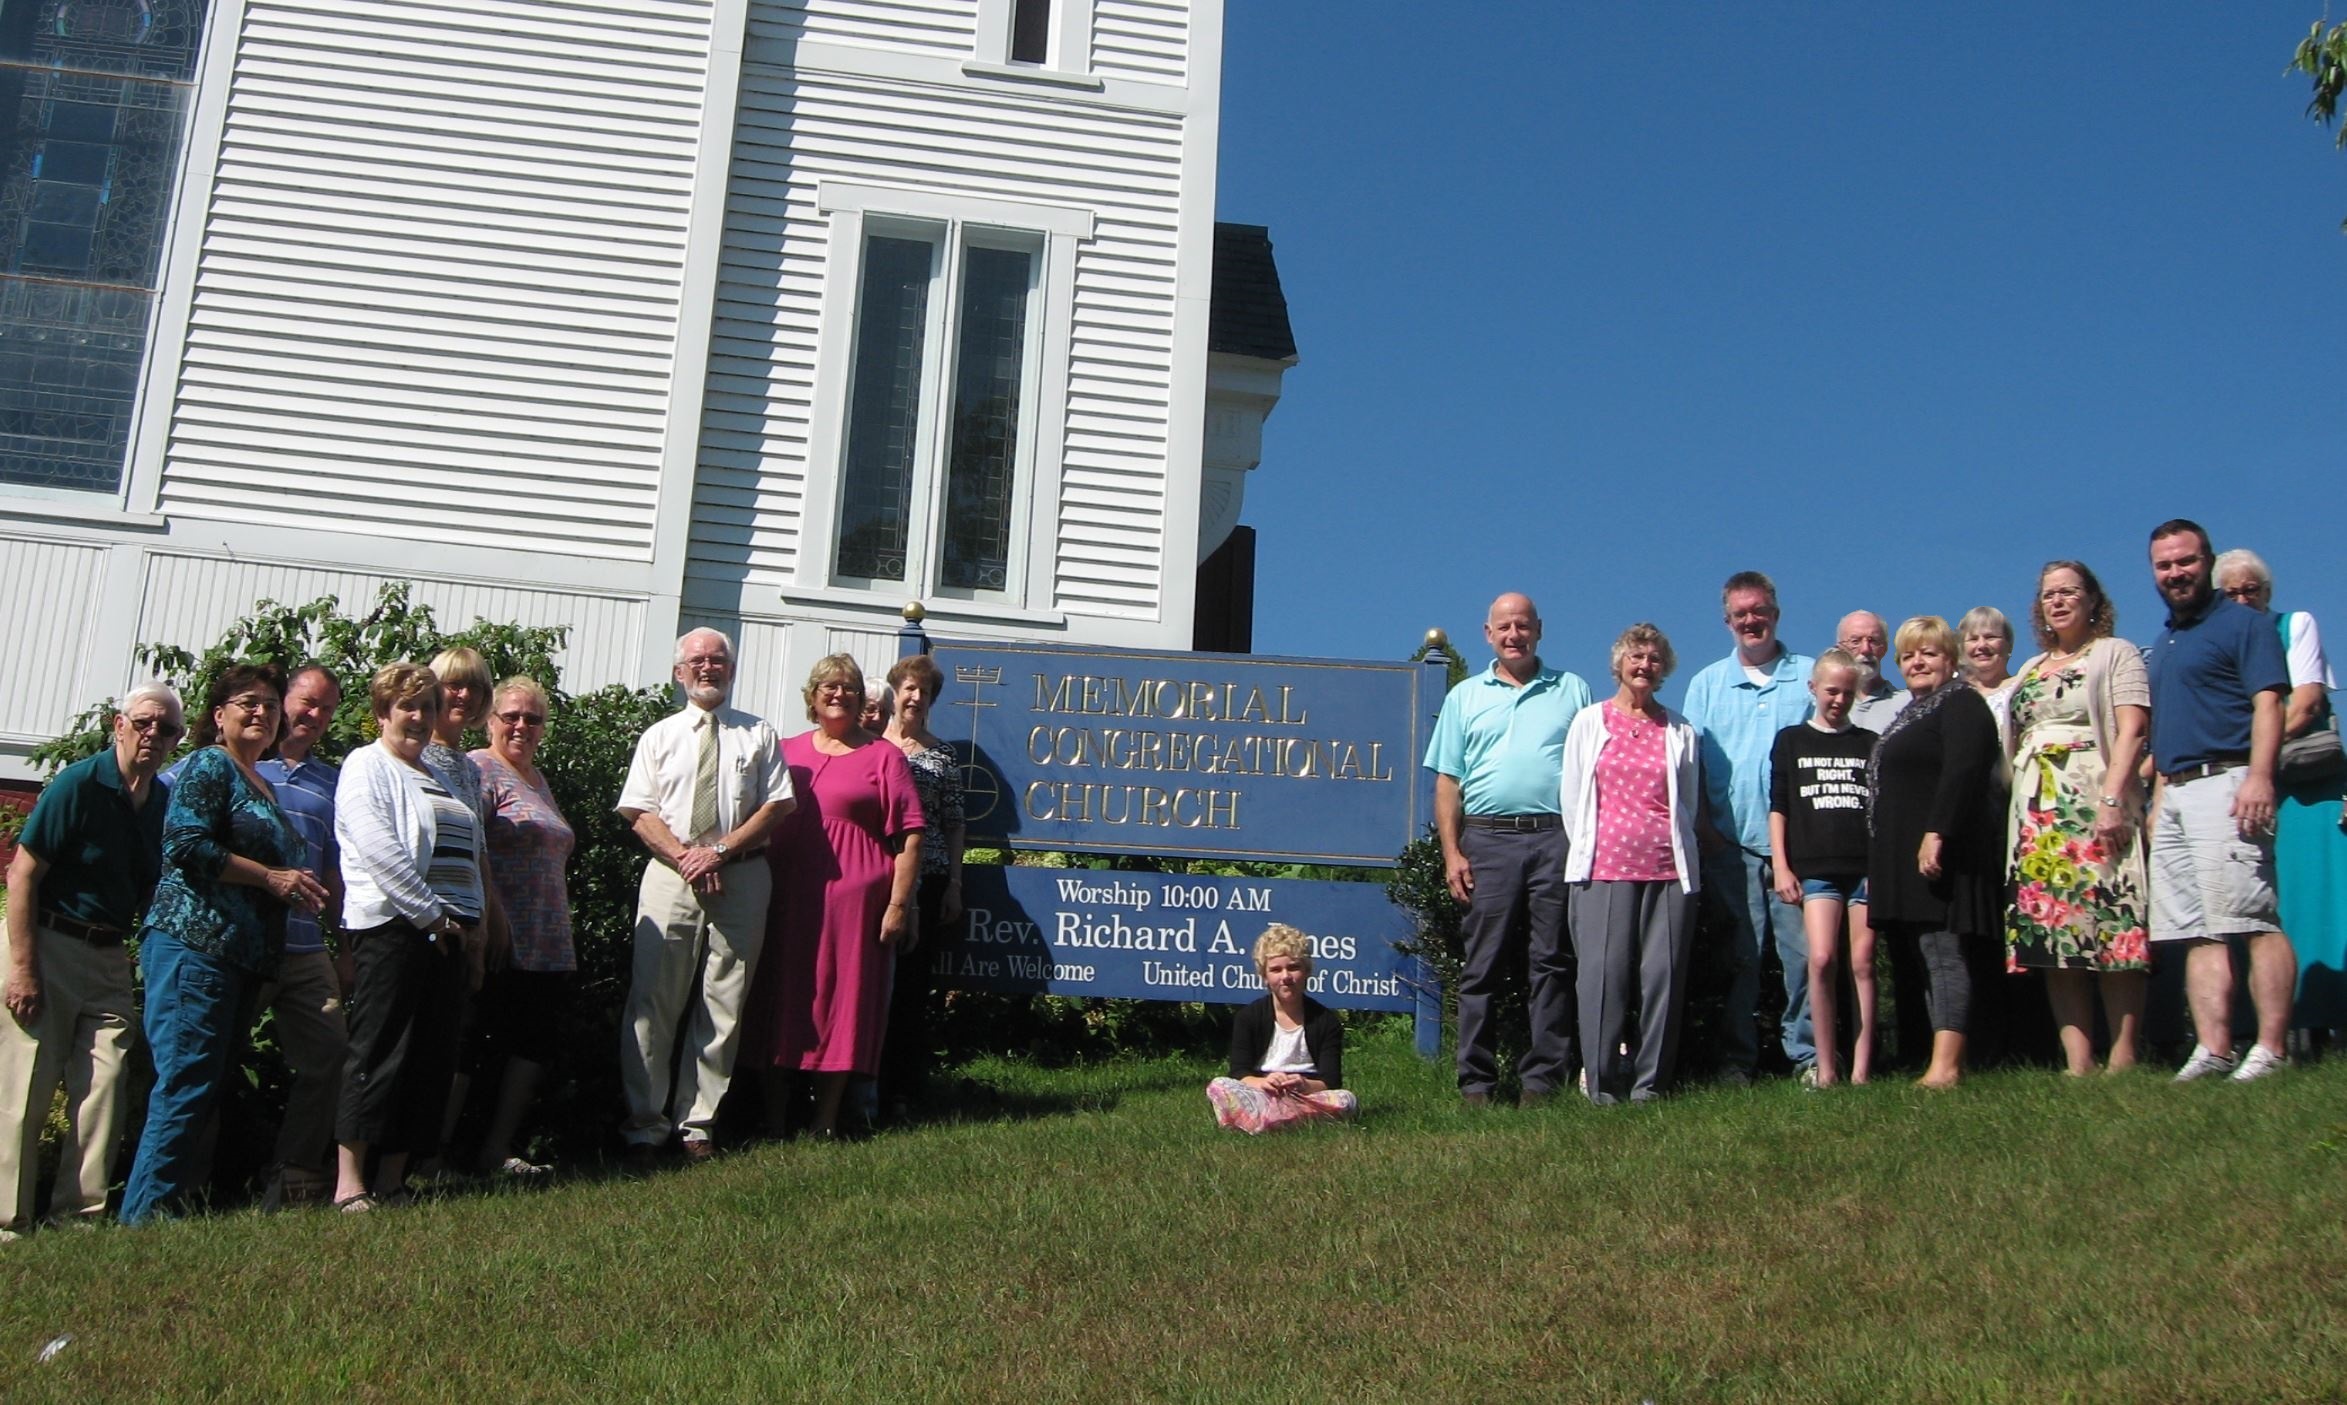 Members of the congregation stand in front of the church building